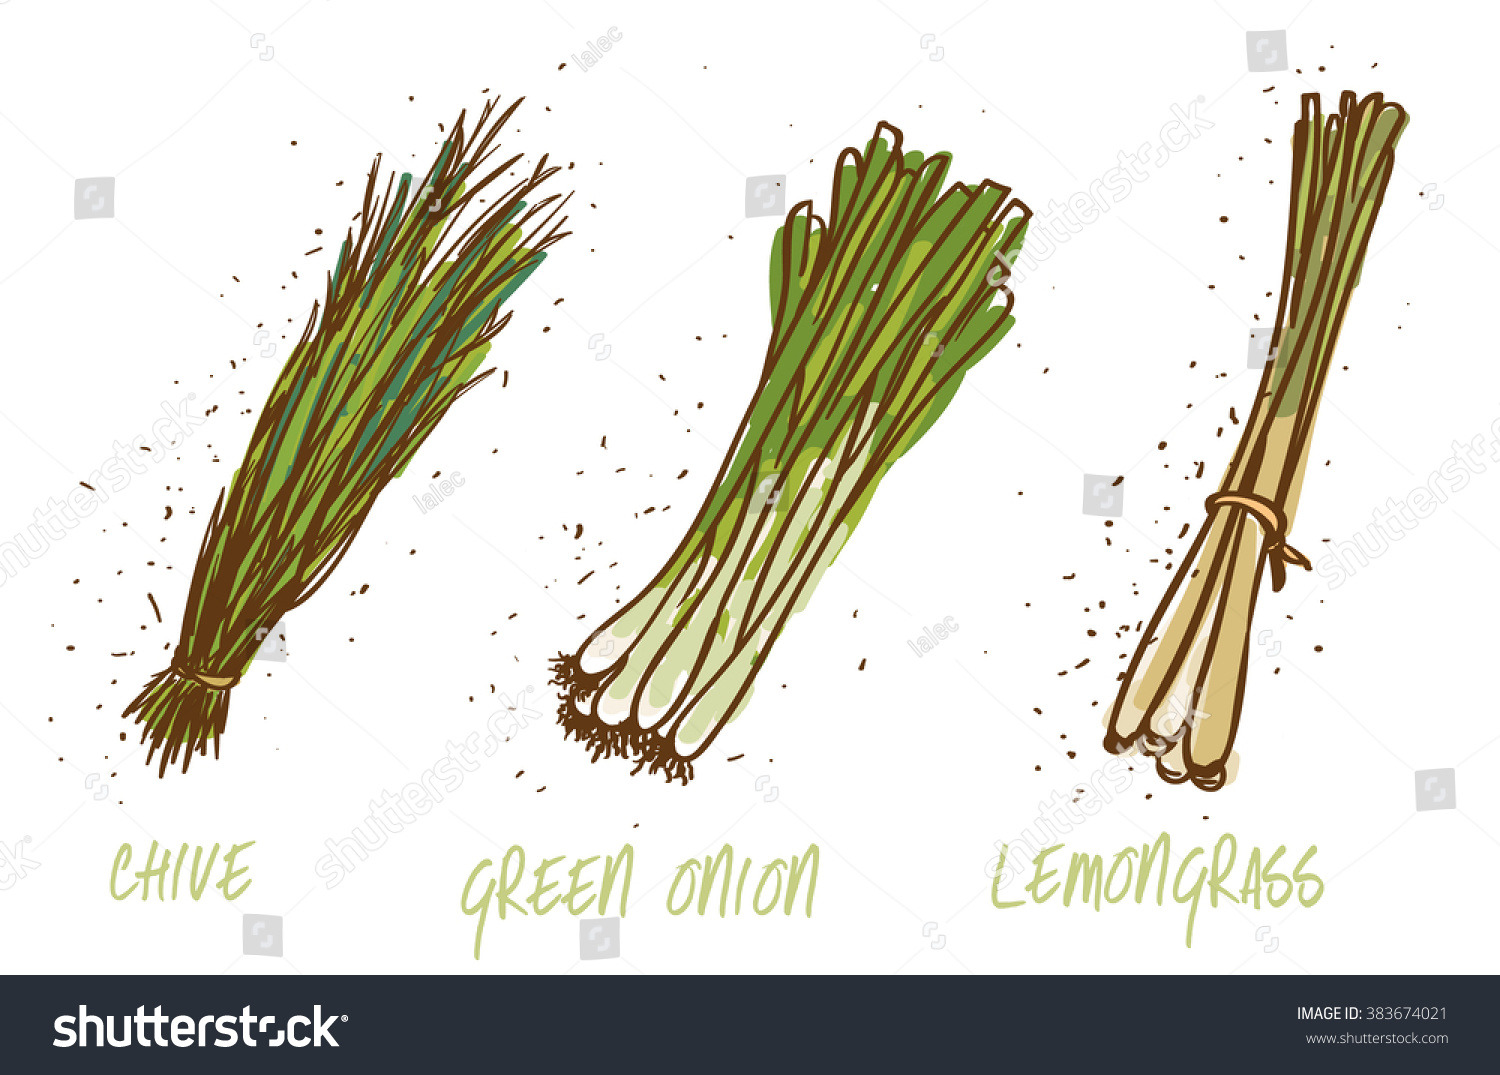 Green Onions Chive Lemongrass On White Stock Vector Royalty Free 383674021,White Asparagus Growing